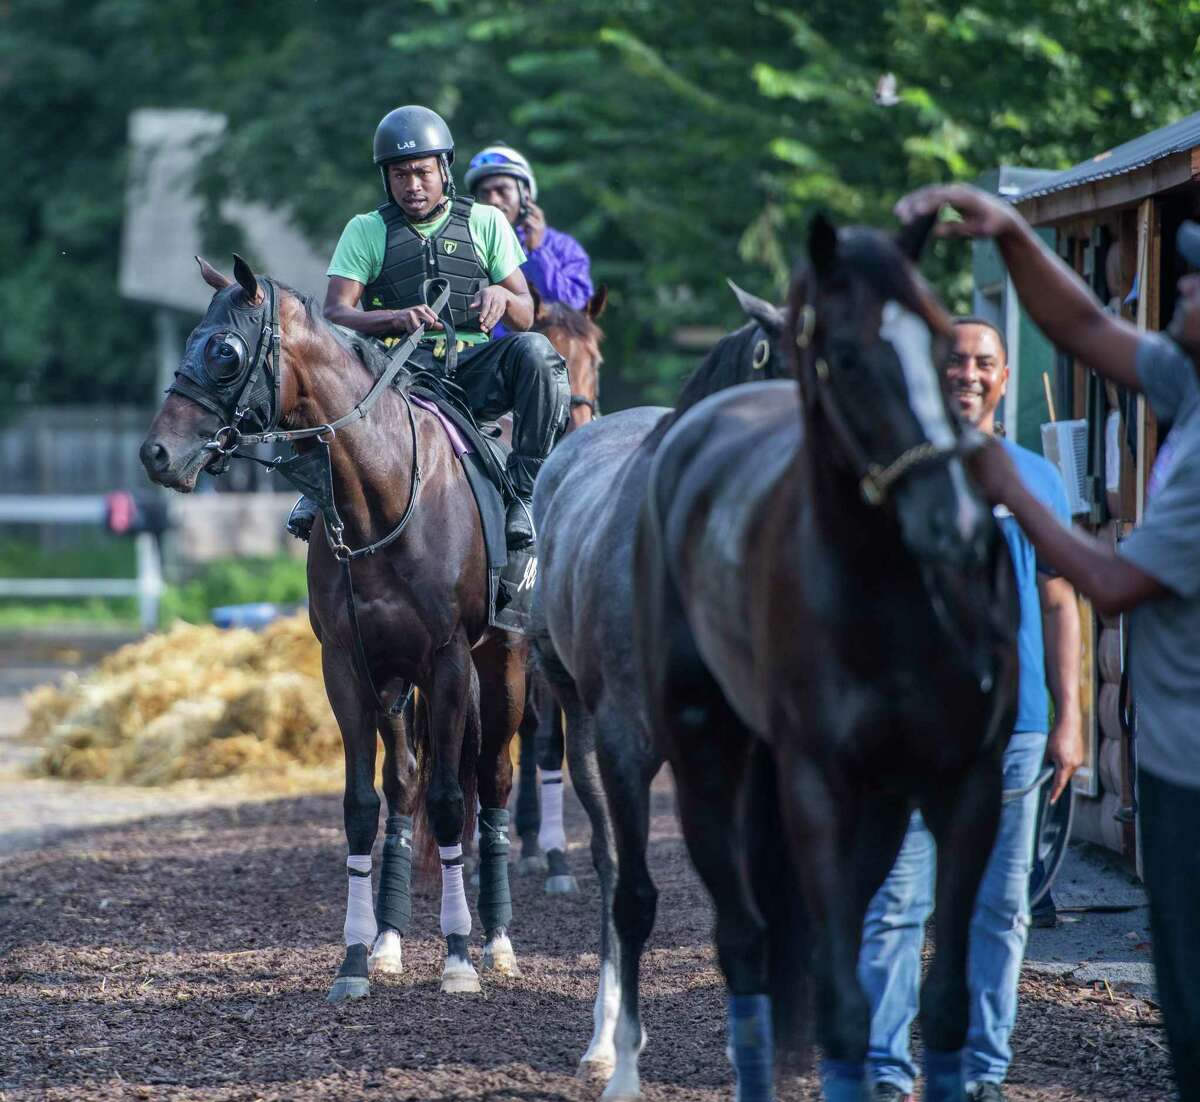 Tuggle trained by Jeremiah Englehart heads out for his morning exercise from his barn at the Oklahoma Training Center track adjacent to the Saratoga Race Course Thursday Aug. 8, 2019 in Saratoga Springs, N.Y. Tuggle is named for the late John Tuggle, a former player for the New York Giants under coach Bill Parcells who owns the horse. Photo Special to the Times Union by Skip Dickstein